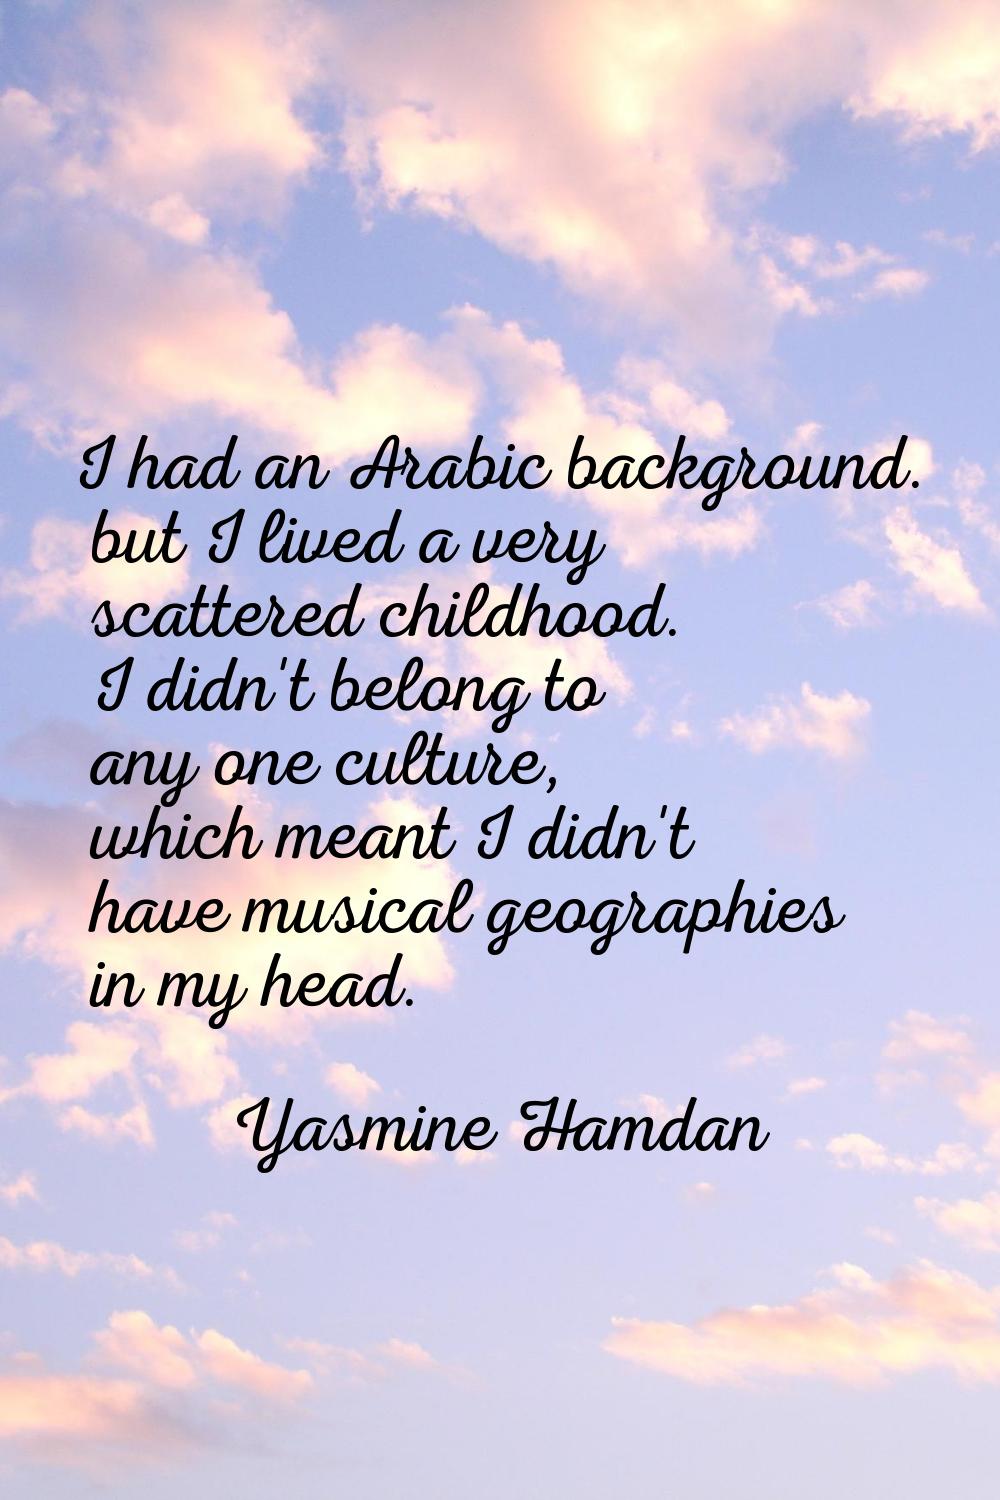 I had an Arabic background. but I lived a very scattered childhood. I didn't belong to any one cult